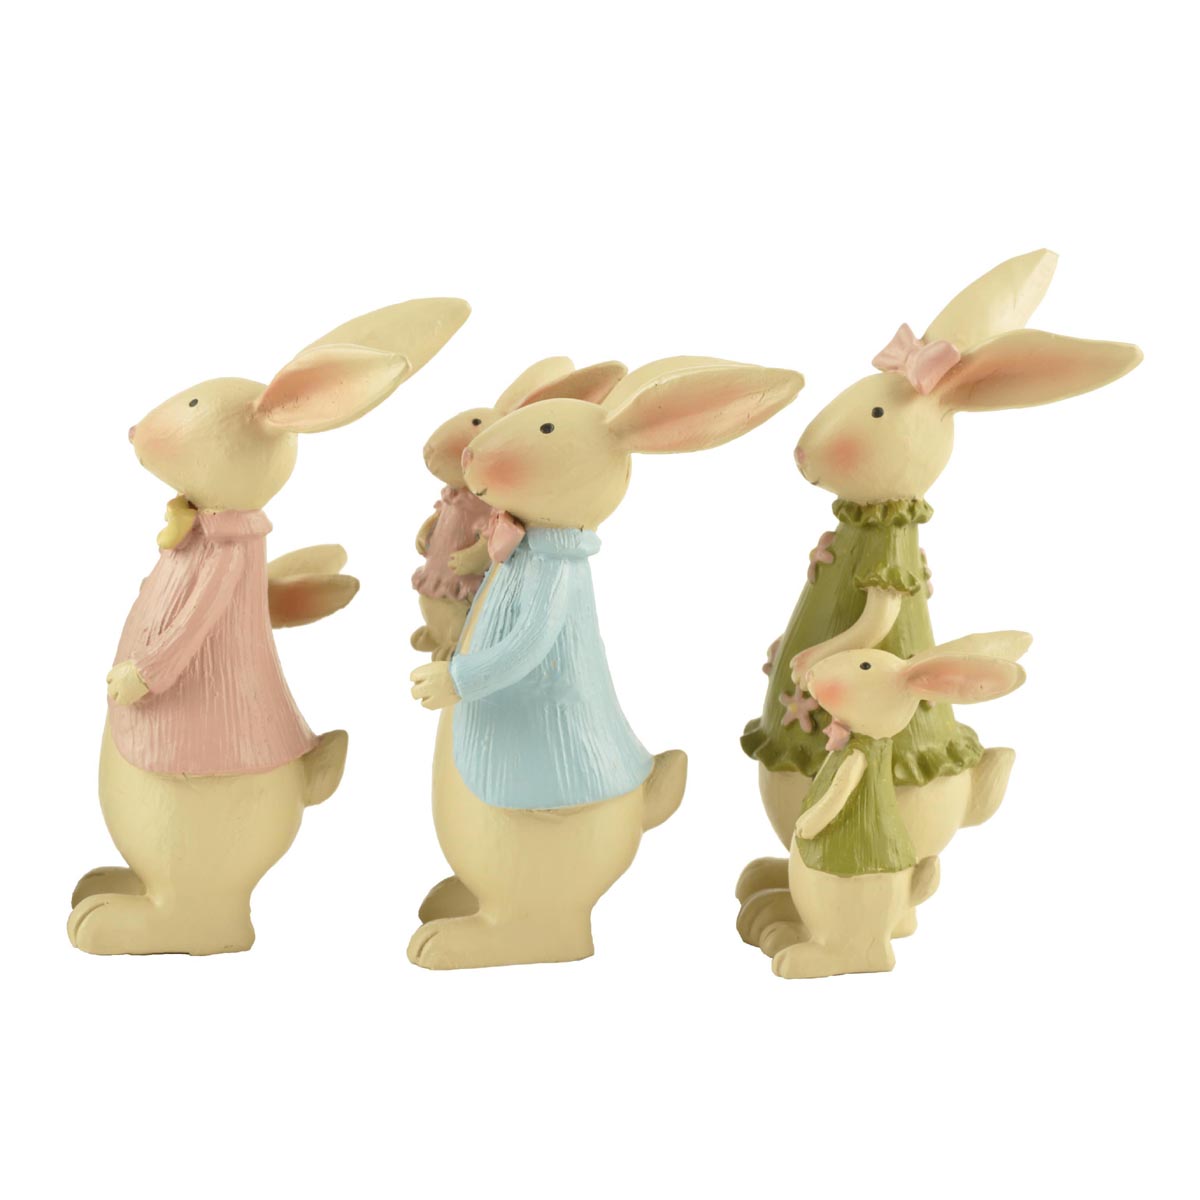 Ennas easter figurines for holiday gift-1